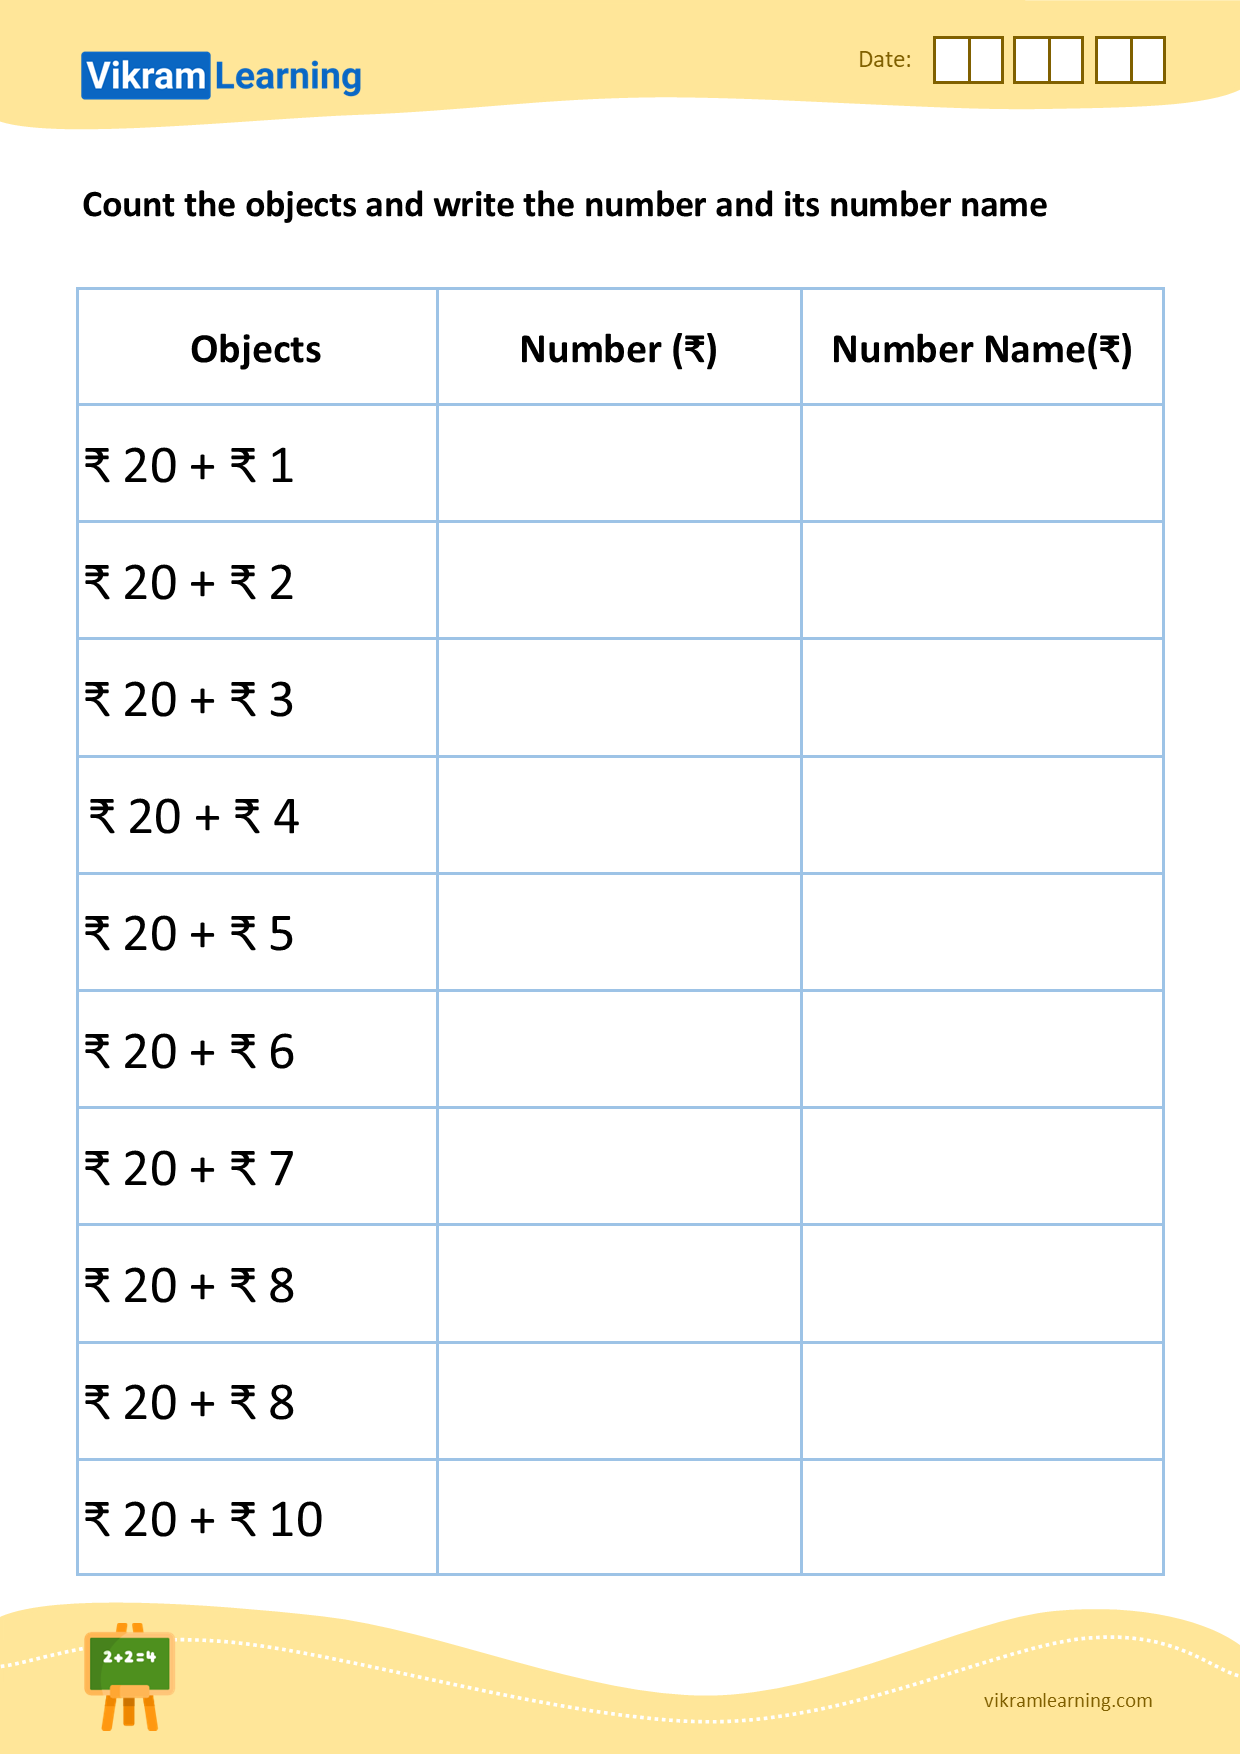 Download count the objects and write the number and its number name (21 to 30) - pattern 2 worksheets